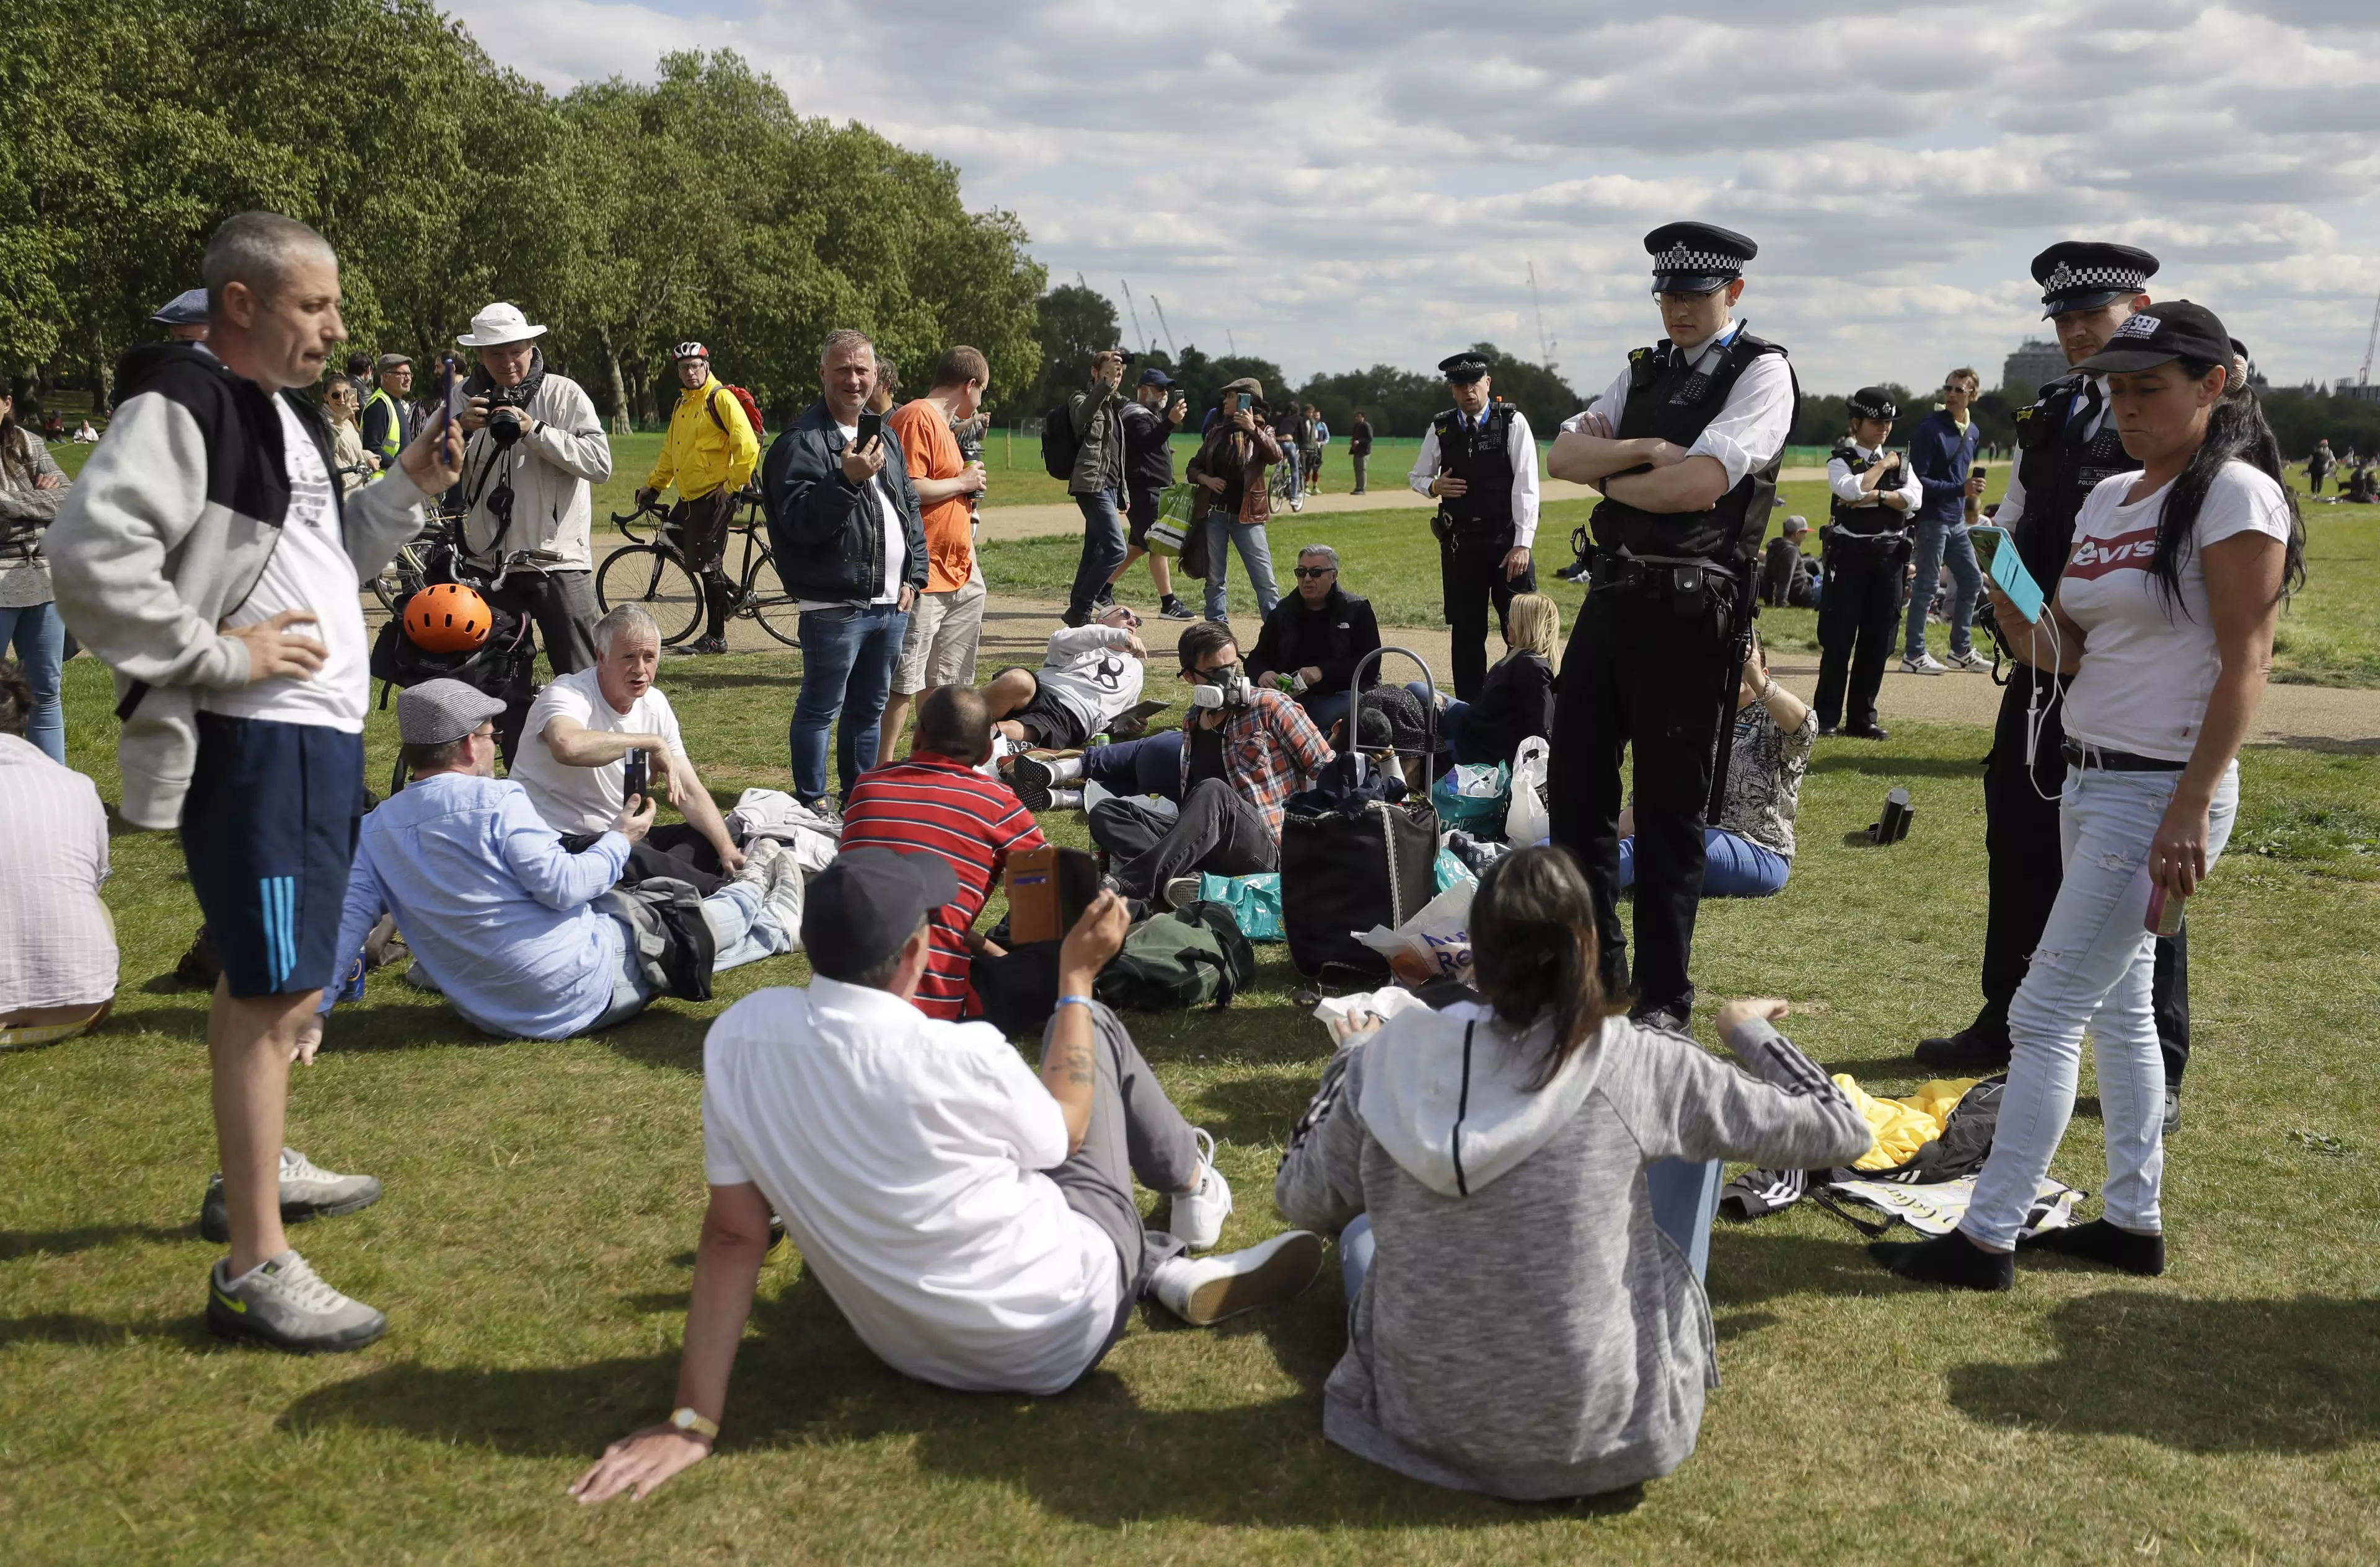 Police approach people protesting the lockdown in Hyde Park, London.